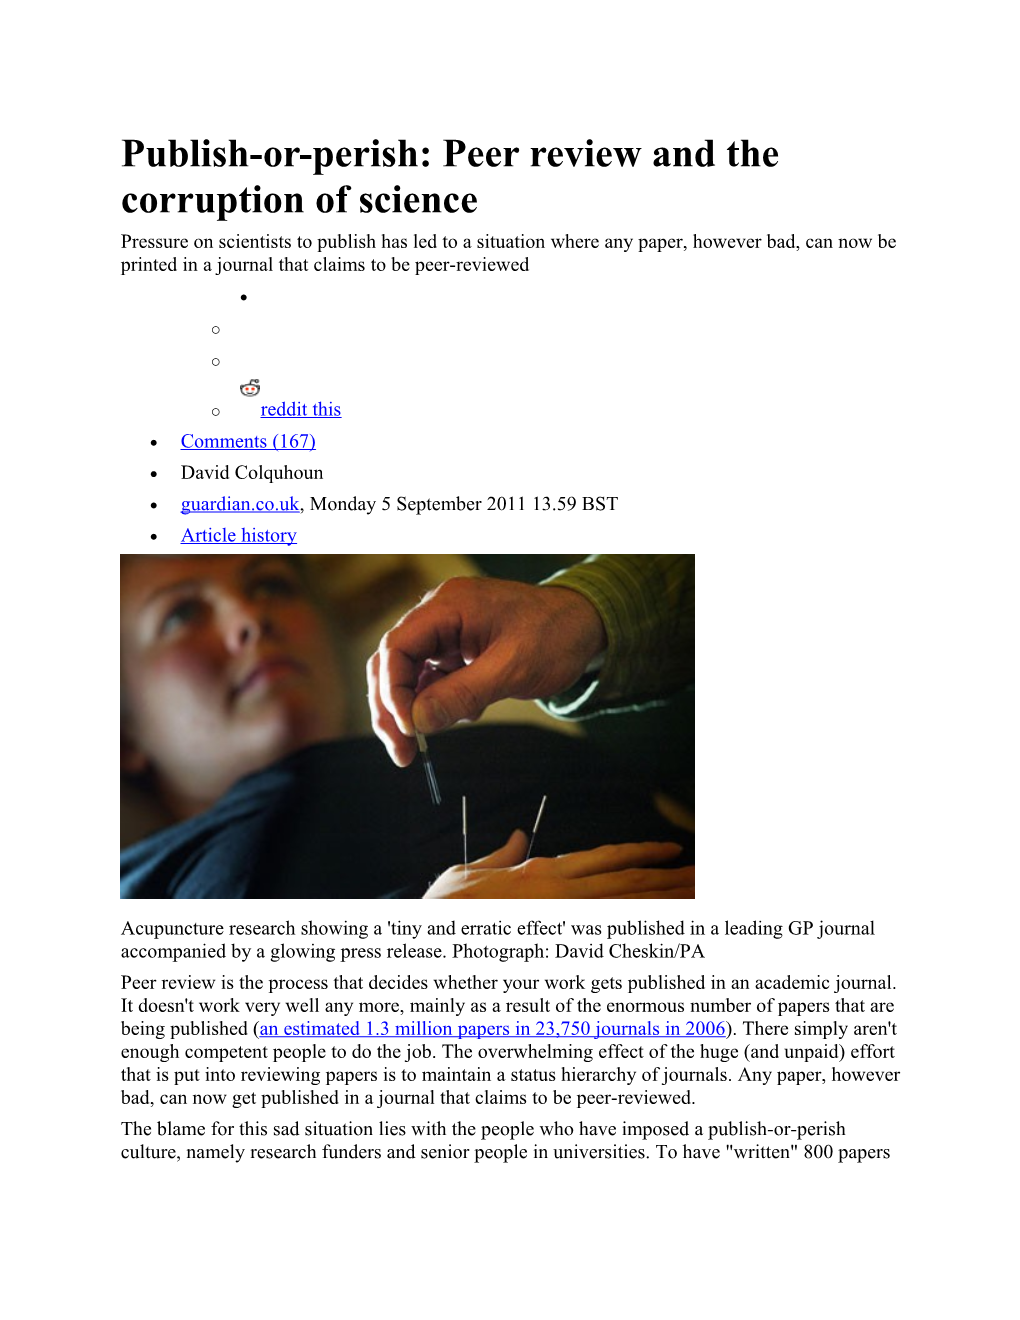 Publish-Or-Perish: Peer Review and the Corruption of Science